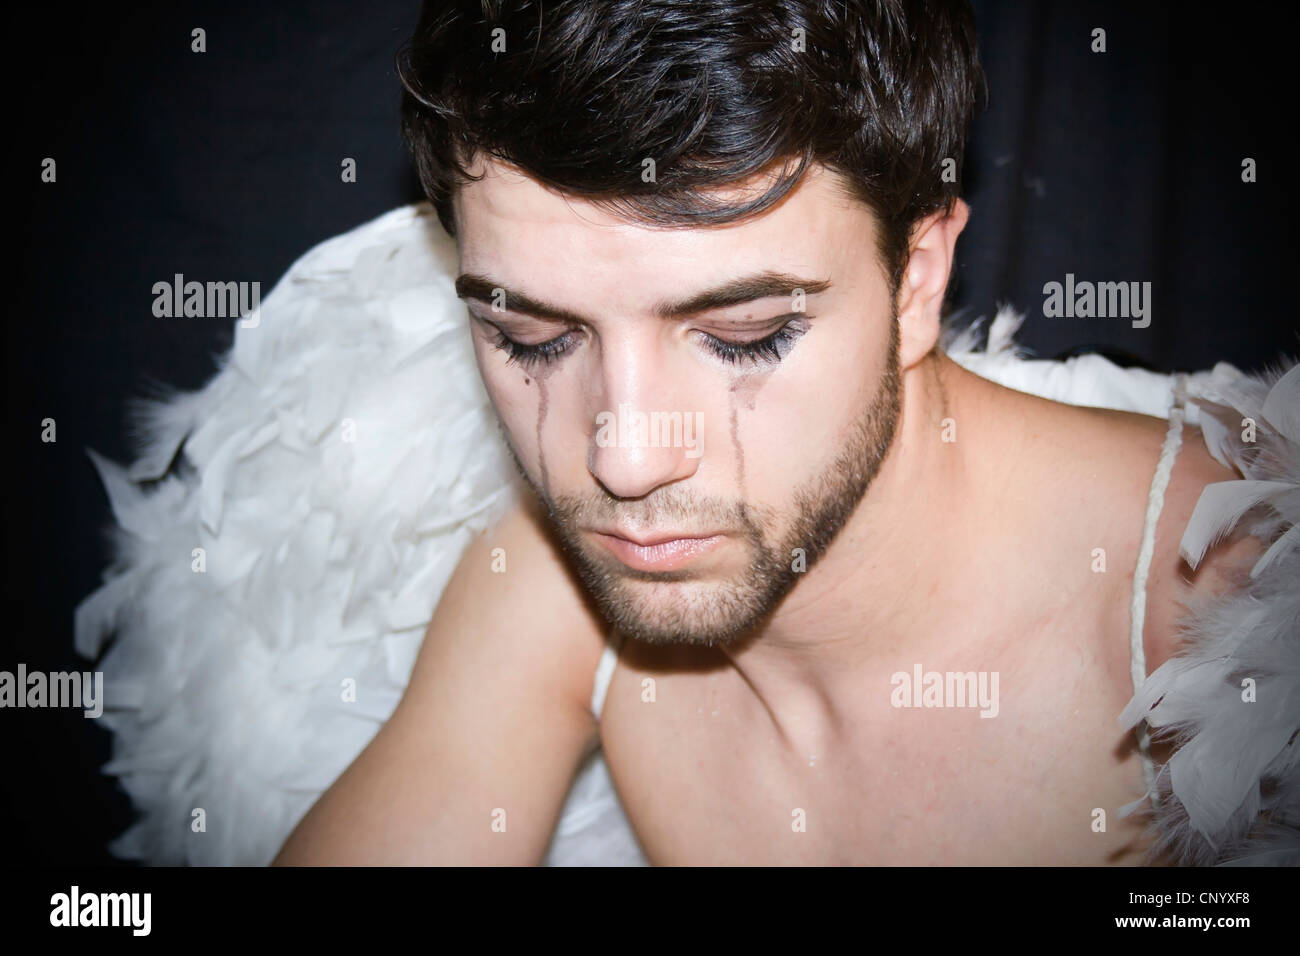 Sad young man with black streaked eye makeup, wearing angel's wings Stock Photo